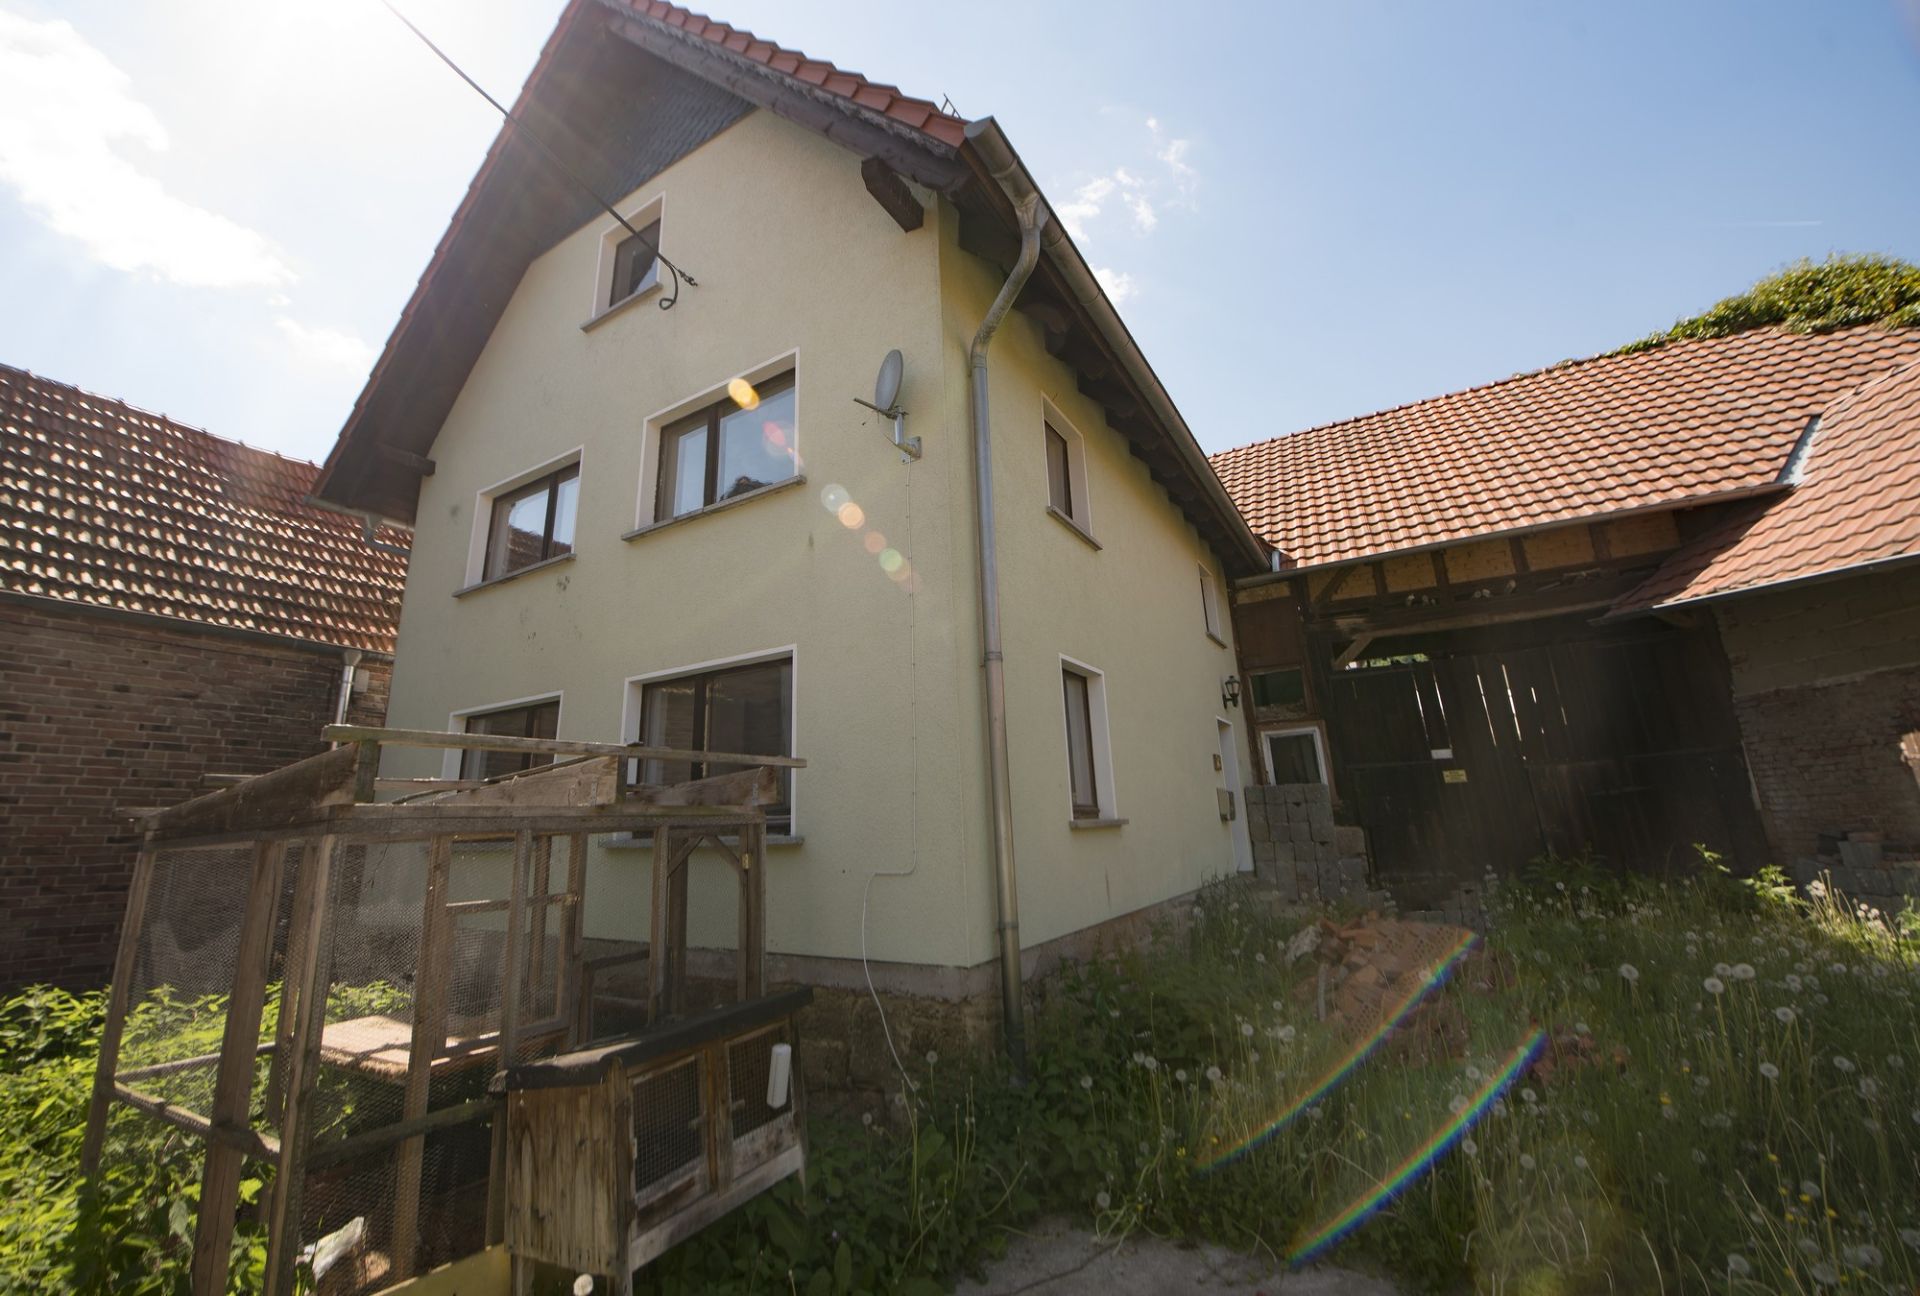 LARGE HOUSE AND SECLUDED GARDEN IN VOLKERODE, GERMANY GERMAN PROPERTY FOR SALE